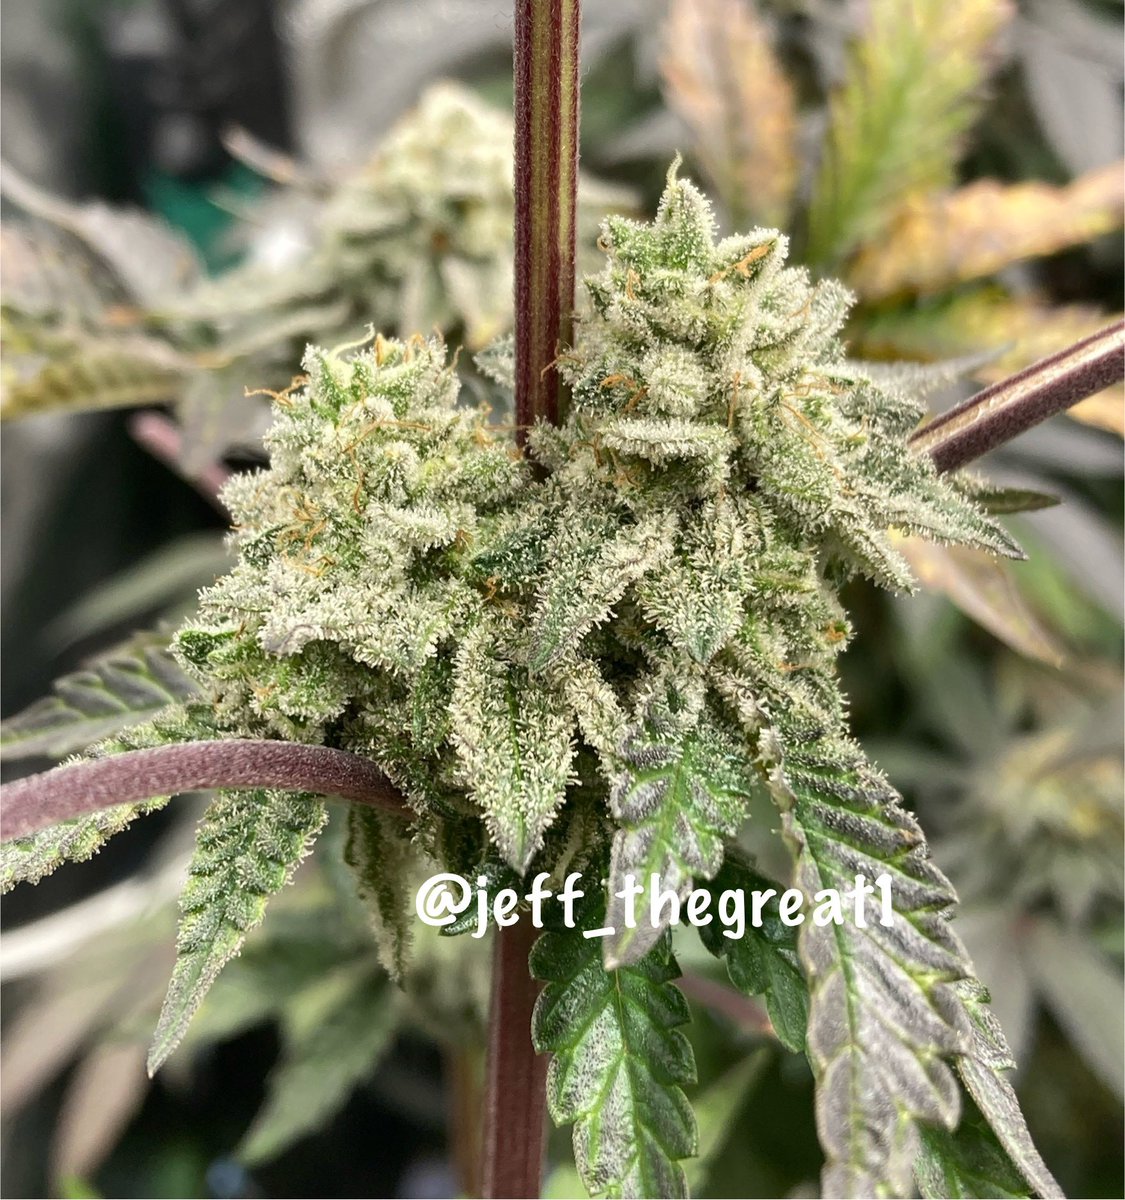 Larry Cake
Wk 8 of flower

#FullyLicensedGenetics

What a beautiful plant and boy is she wver getting frostier 🔥🔥

#Cannaland #GrowYourOwn #GreenThumb #WhatYouGrowing